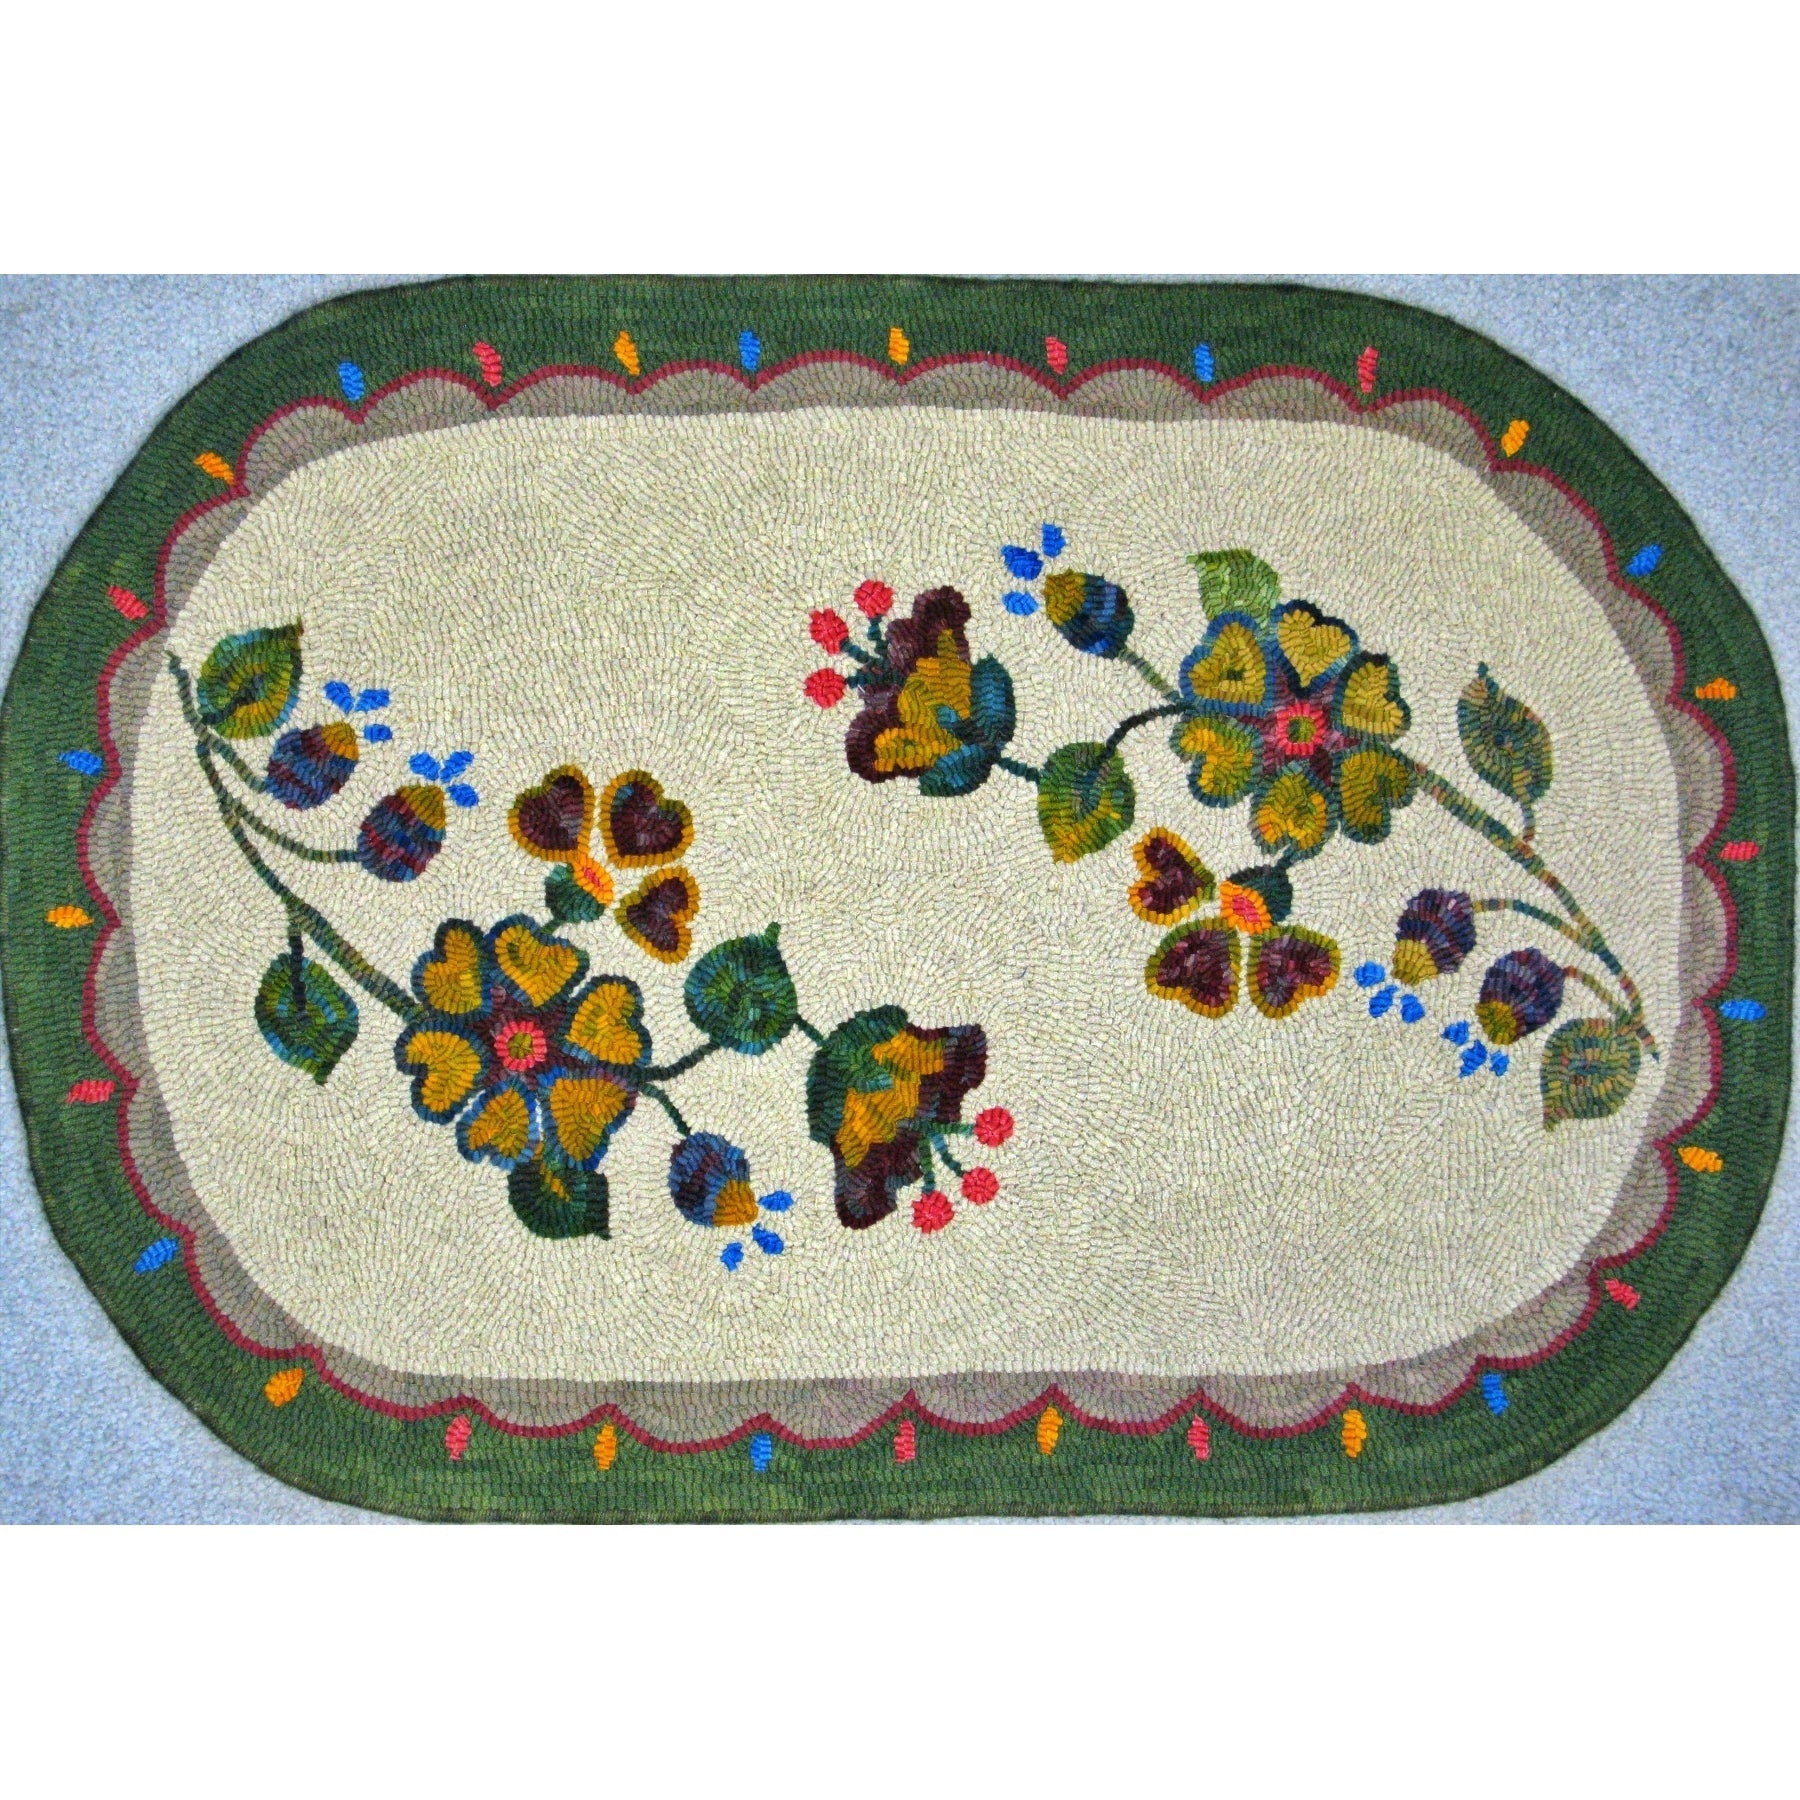 Old Time Oval, rug hooked by Linda Bell